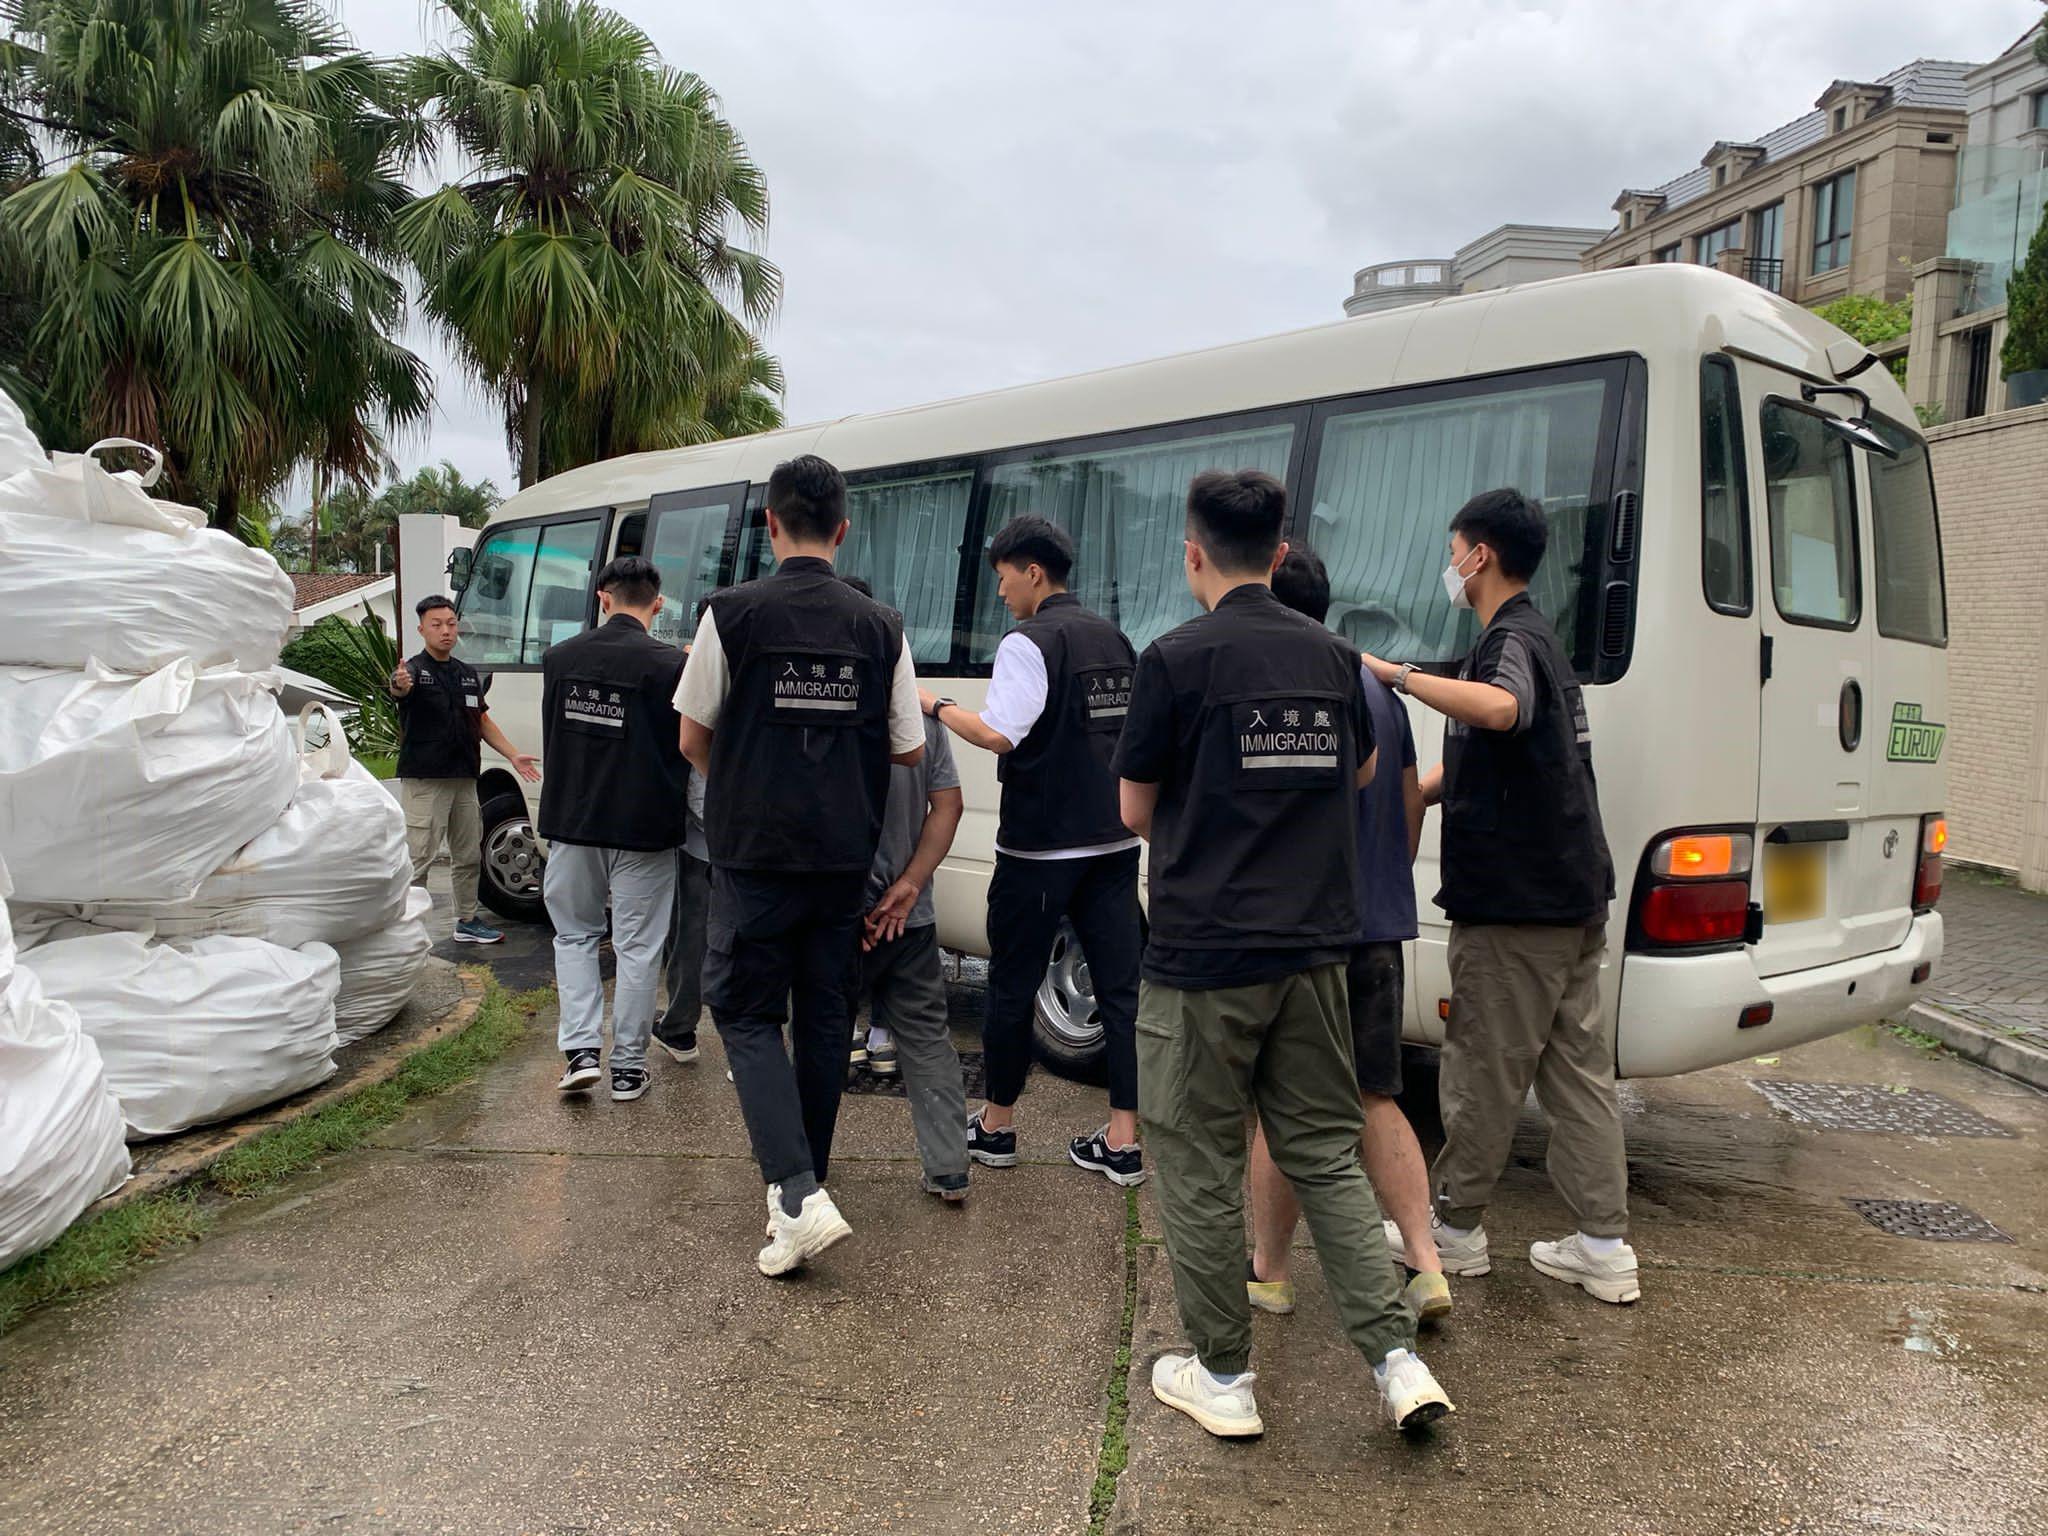 The Immigration Department mounted a series of territory-wide anti-illegal worker operations codenamed "Contribute" and "Twilight", and joint operations with the Hong Kong Police Force codenamed "Champion" and "Windsand", for four consecutive days from June 5 to yesterday (June 8). Photo shows suspected illegal workers arrested during an operation.